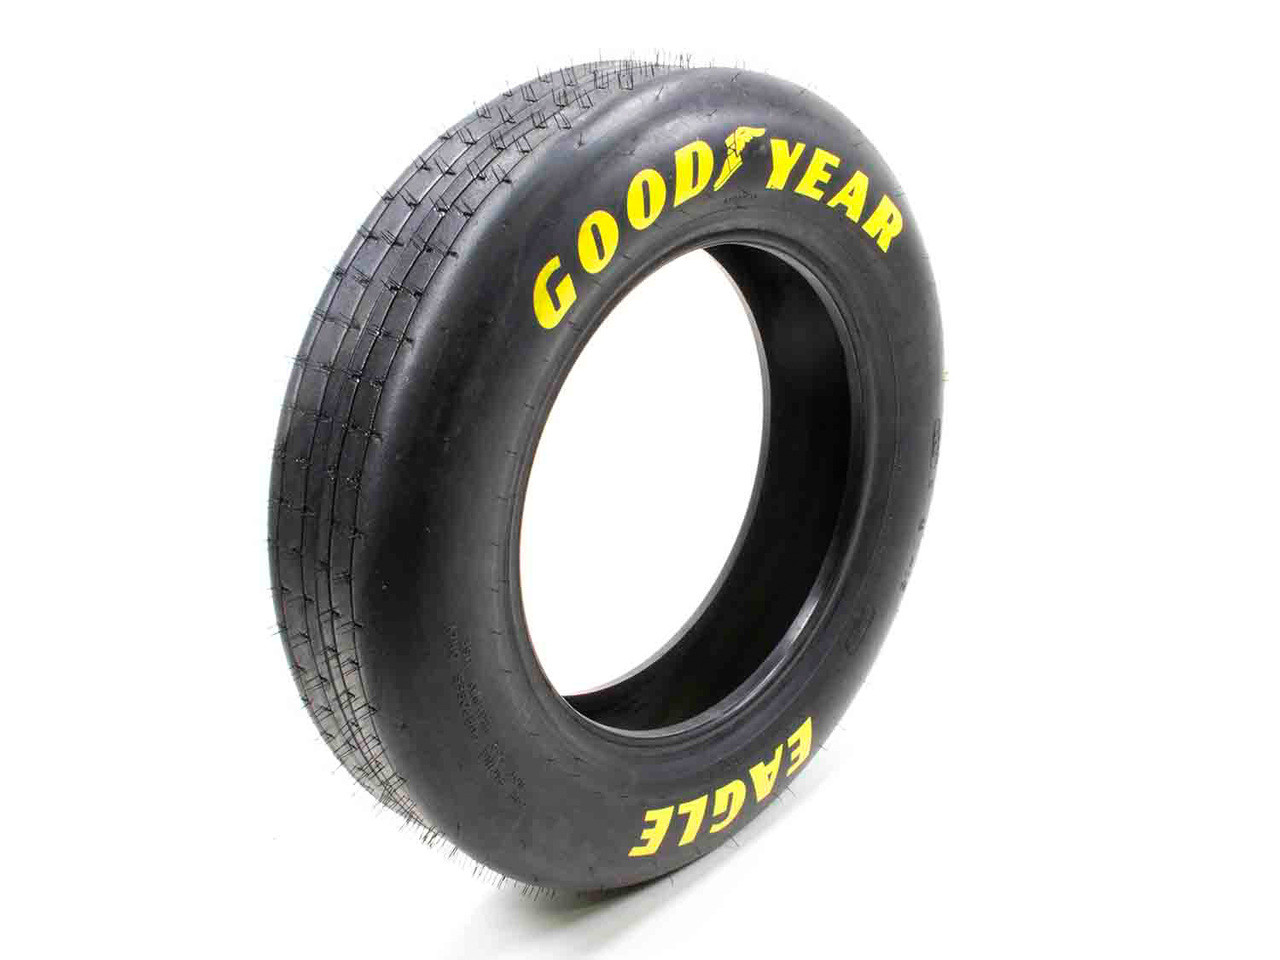 Goodyear 24.0/5.0-15 Front Runner  - GDYD1962